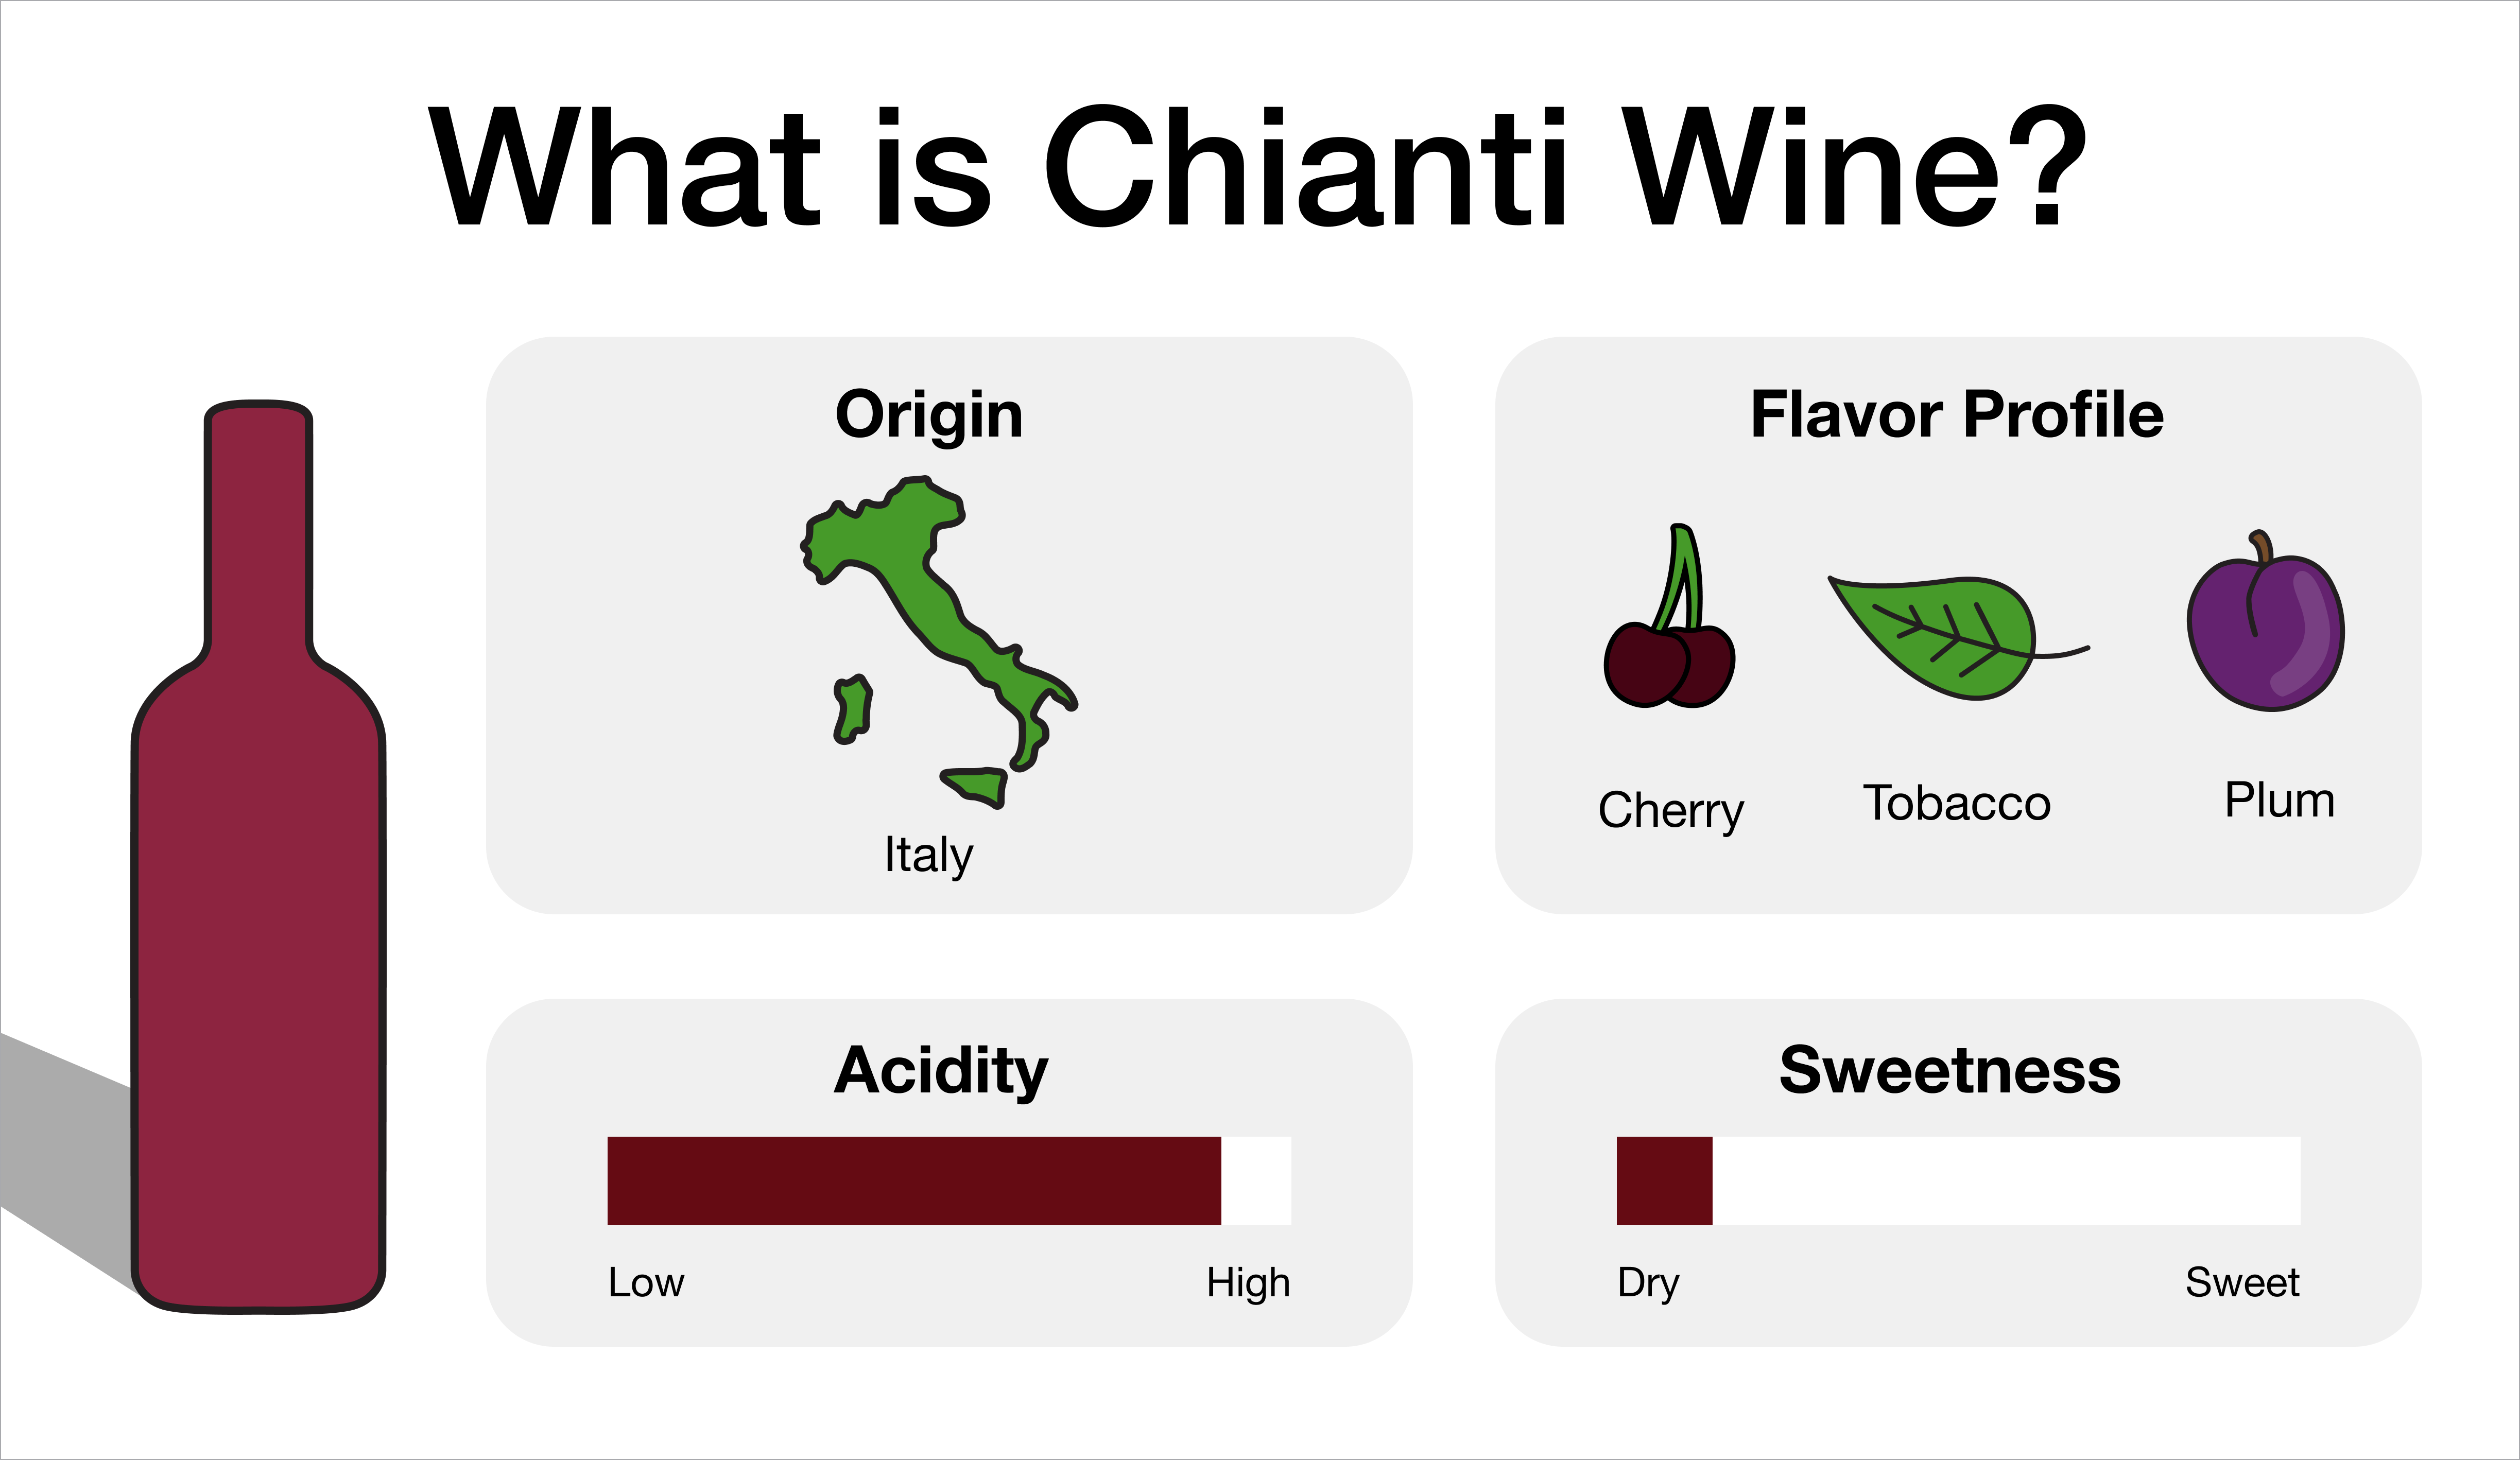 What is Chianti Wine?